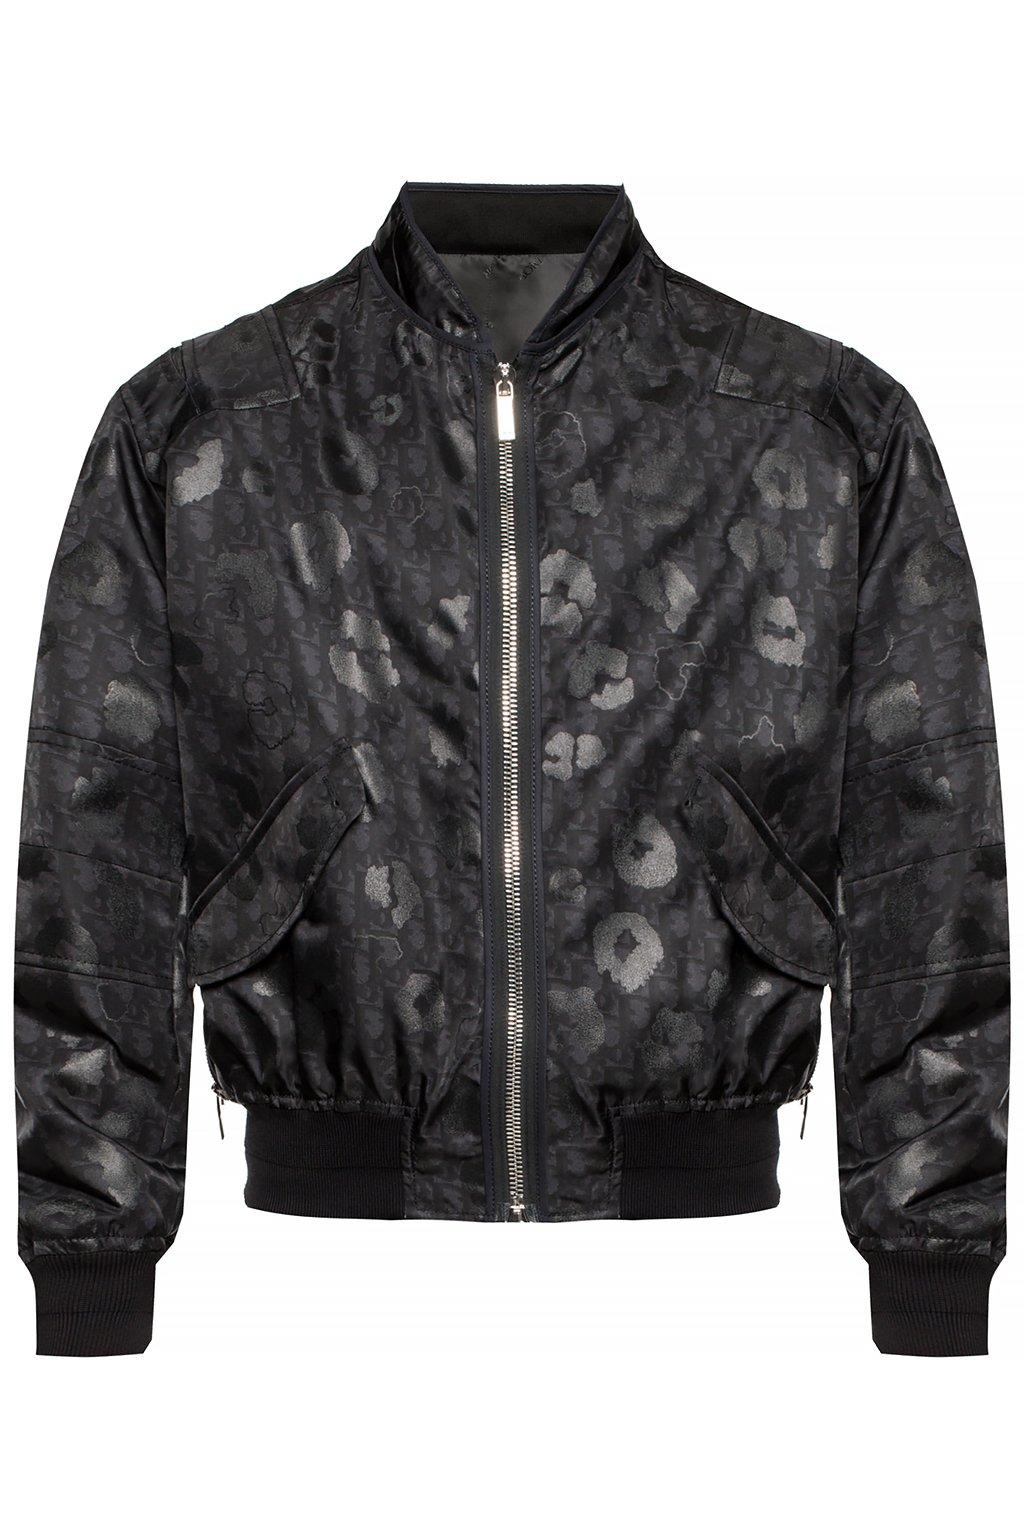 Dior Synthetic Printed Bomber Jacket in Black for Men - Lyst